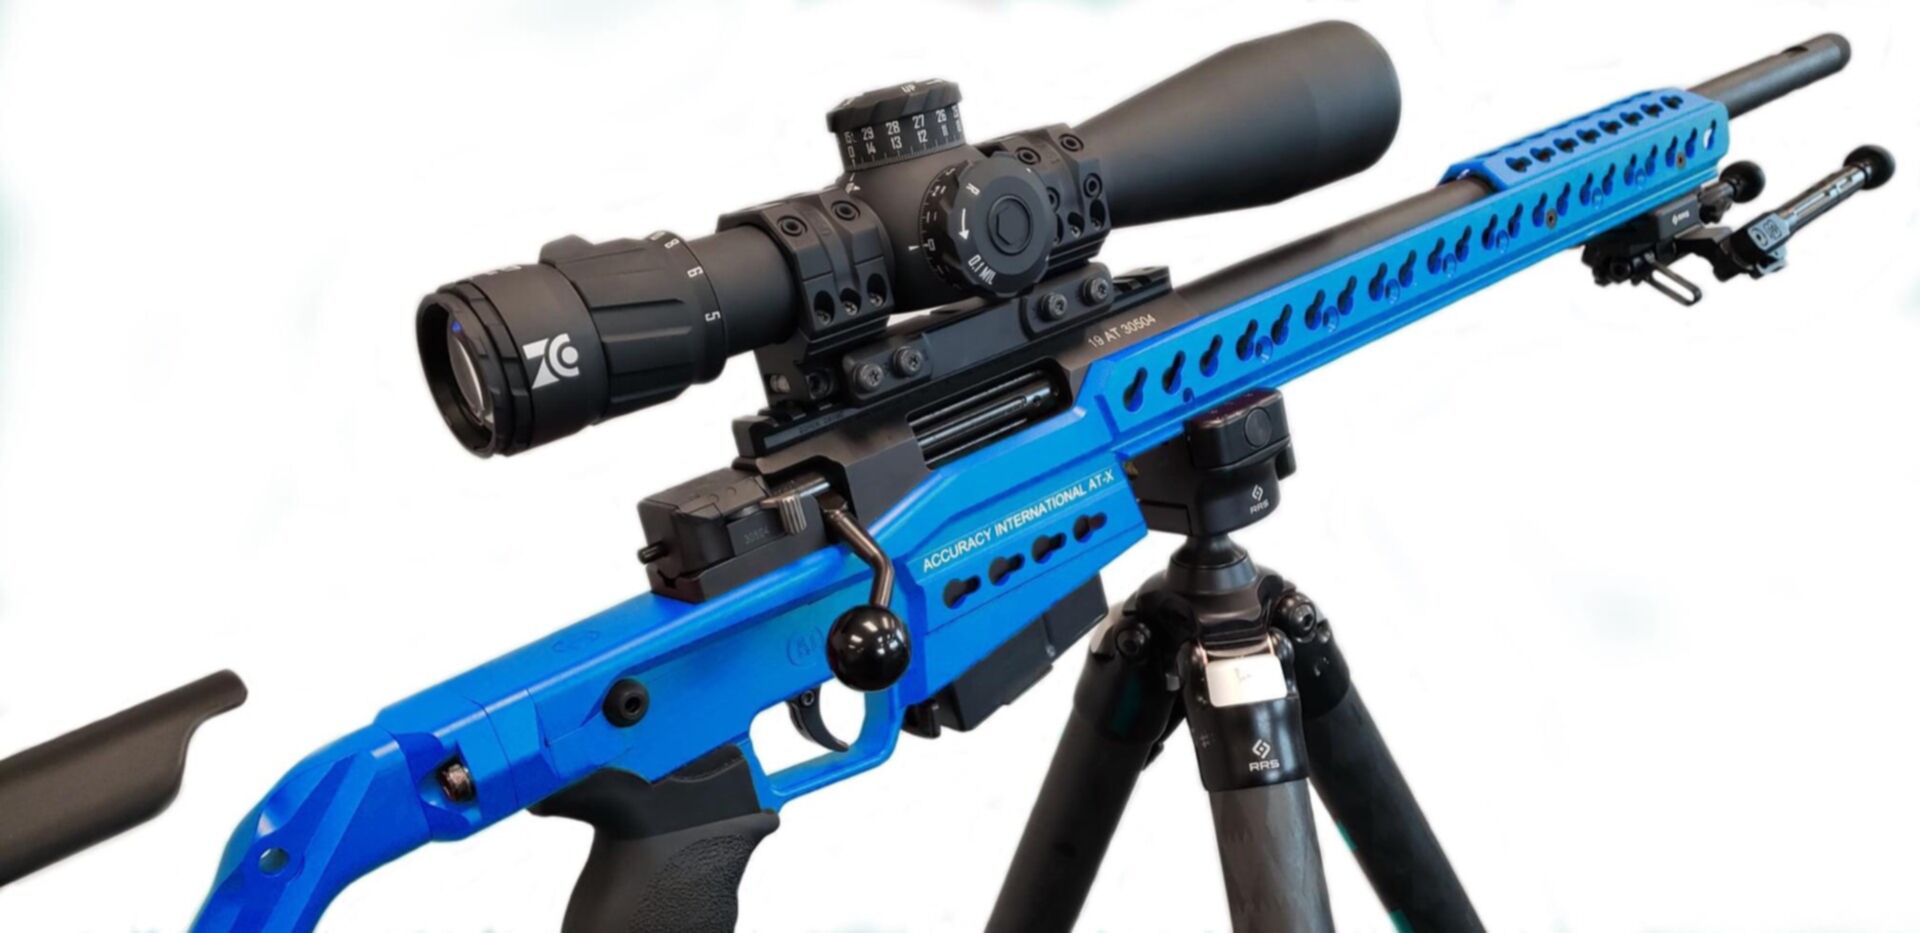 Accuracy International - AT-X Short Action 6.5 CM Competition Rifle